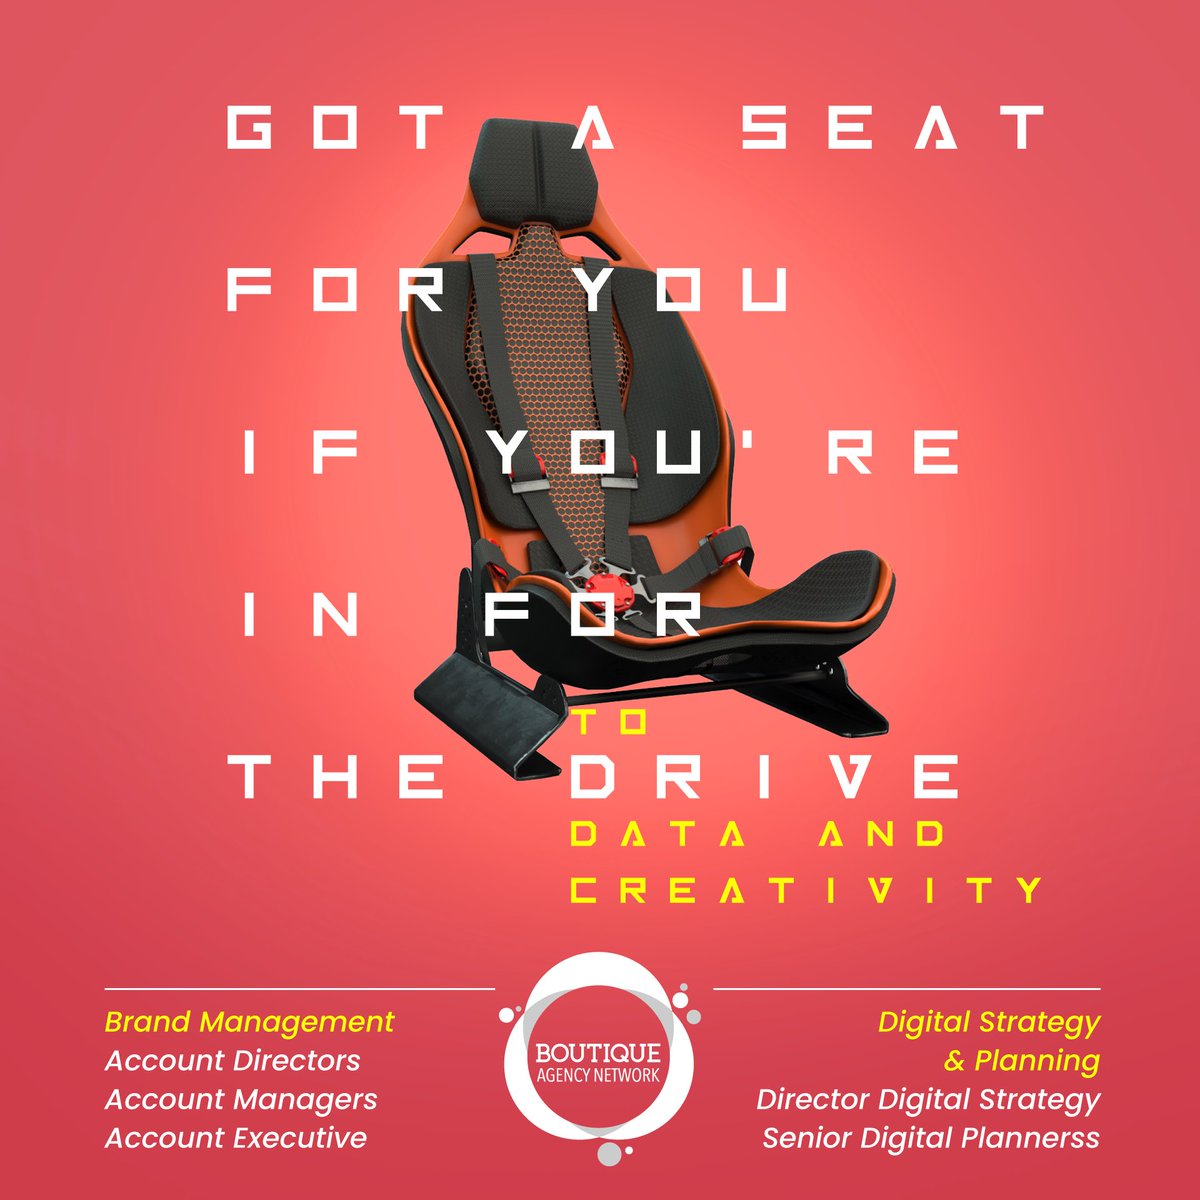 Ready set go getter! seat is all yours if you're driven enough. Apply careers@boutiqueagencynetwork.com  #careers #BoutiqueAgency